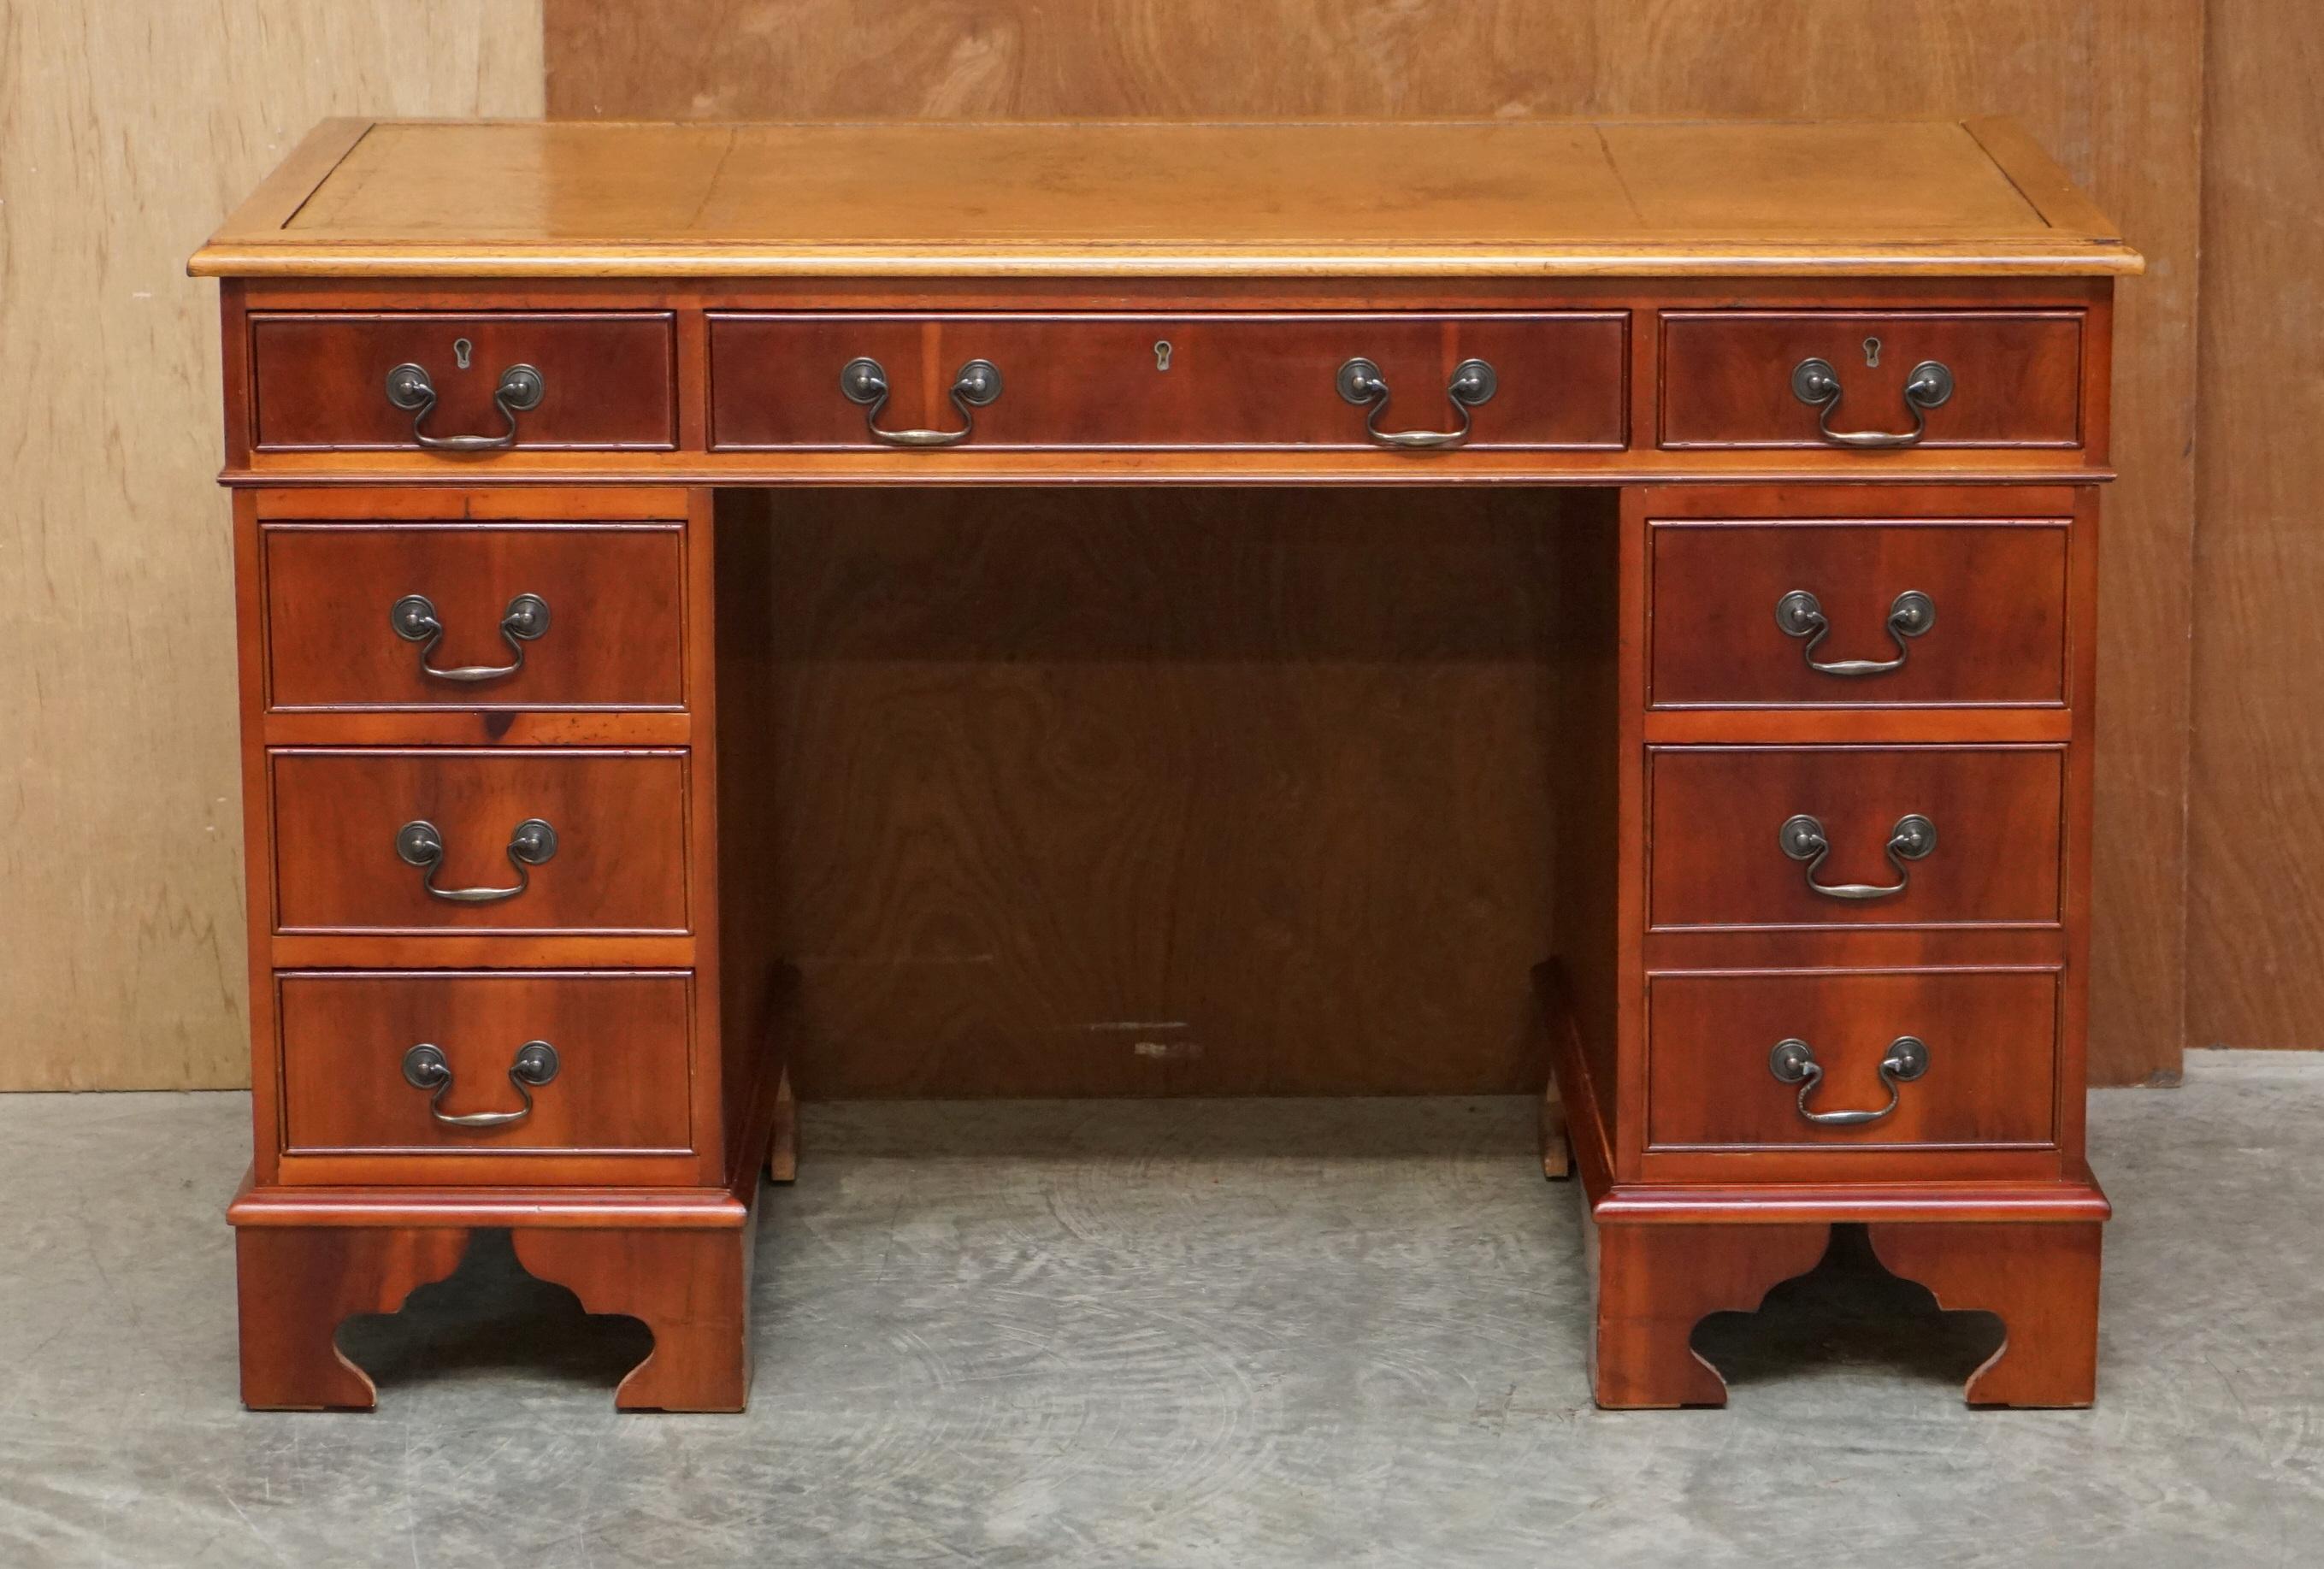 We are delighted to offer for sale this vintage Walnut & Tan Brown leather twin pedestal partner desk 

This is a good looking, well made and decorative piece, the cuts of timber are lovely and have a very English country house look and feel to